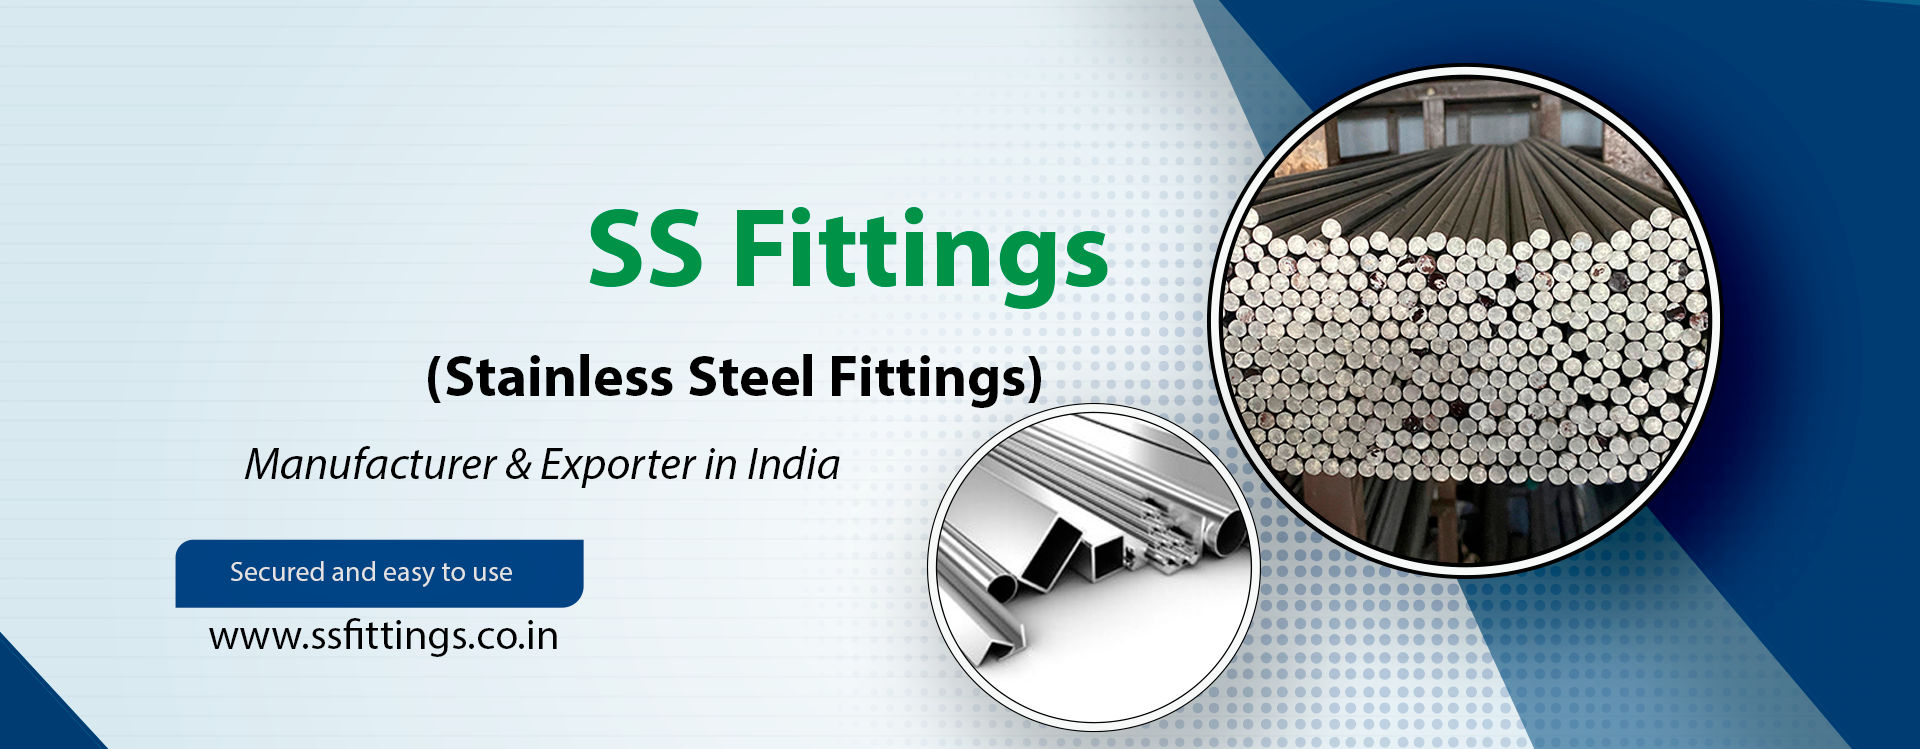 Stainless Steel Fittings, Tube, Pipe, Sheet Manufacturer, Supplier, Dealer in Ahmedabad, India